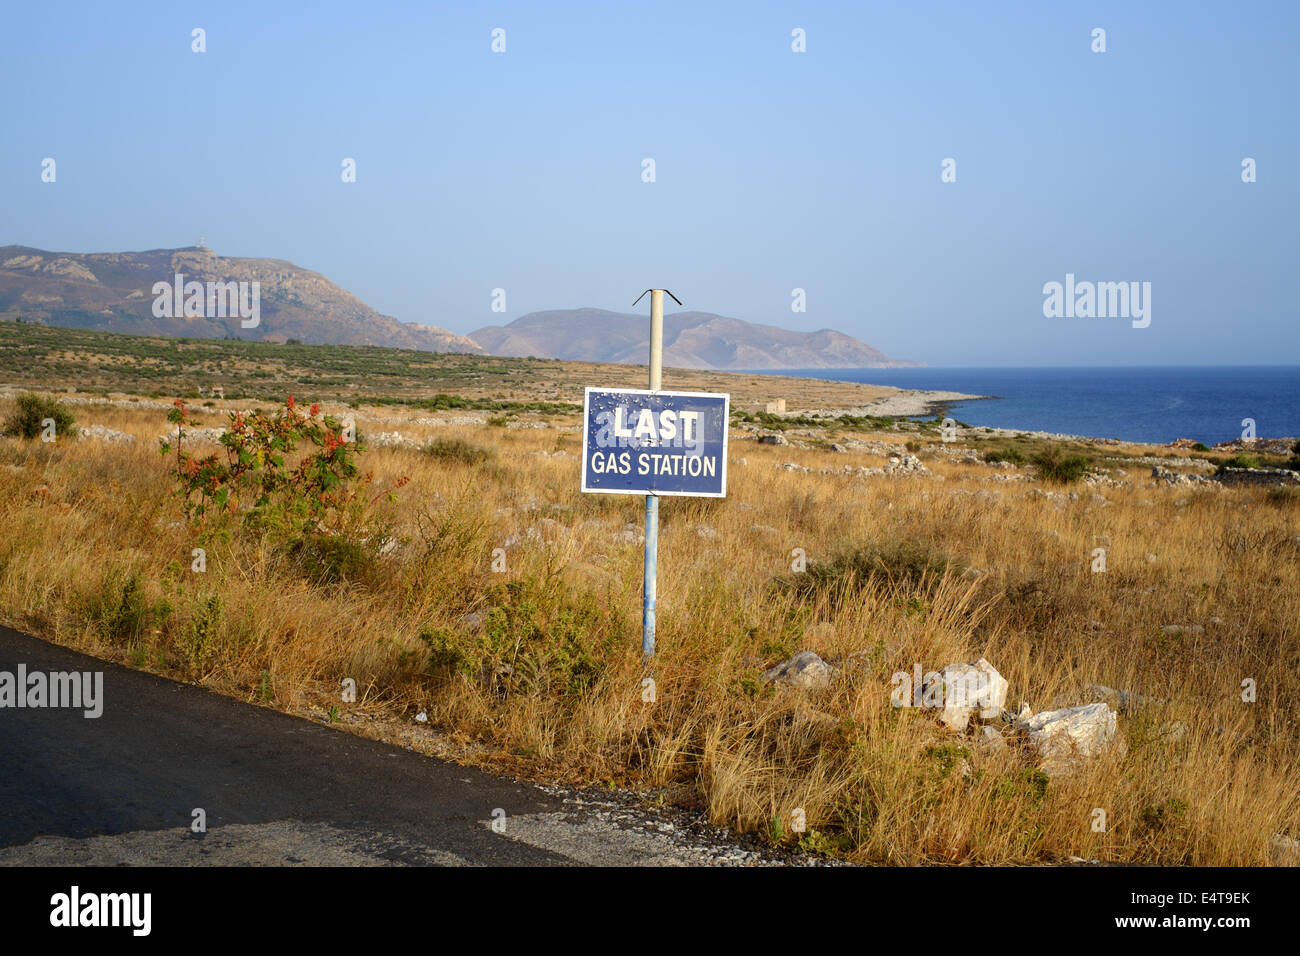 MANI PENINSULA, PELOPONNESE, GREECE, 8th July 2014. Last Gas Station - road sign in the southerly and remote Deep Mani. Stock Photo